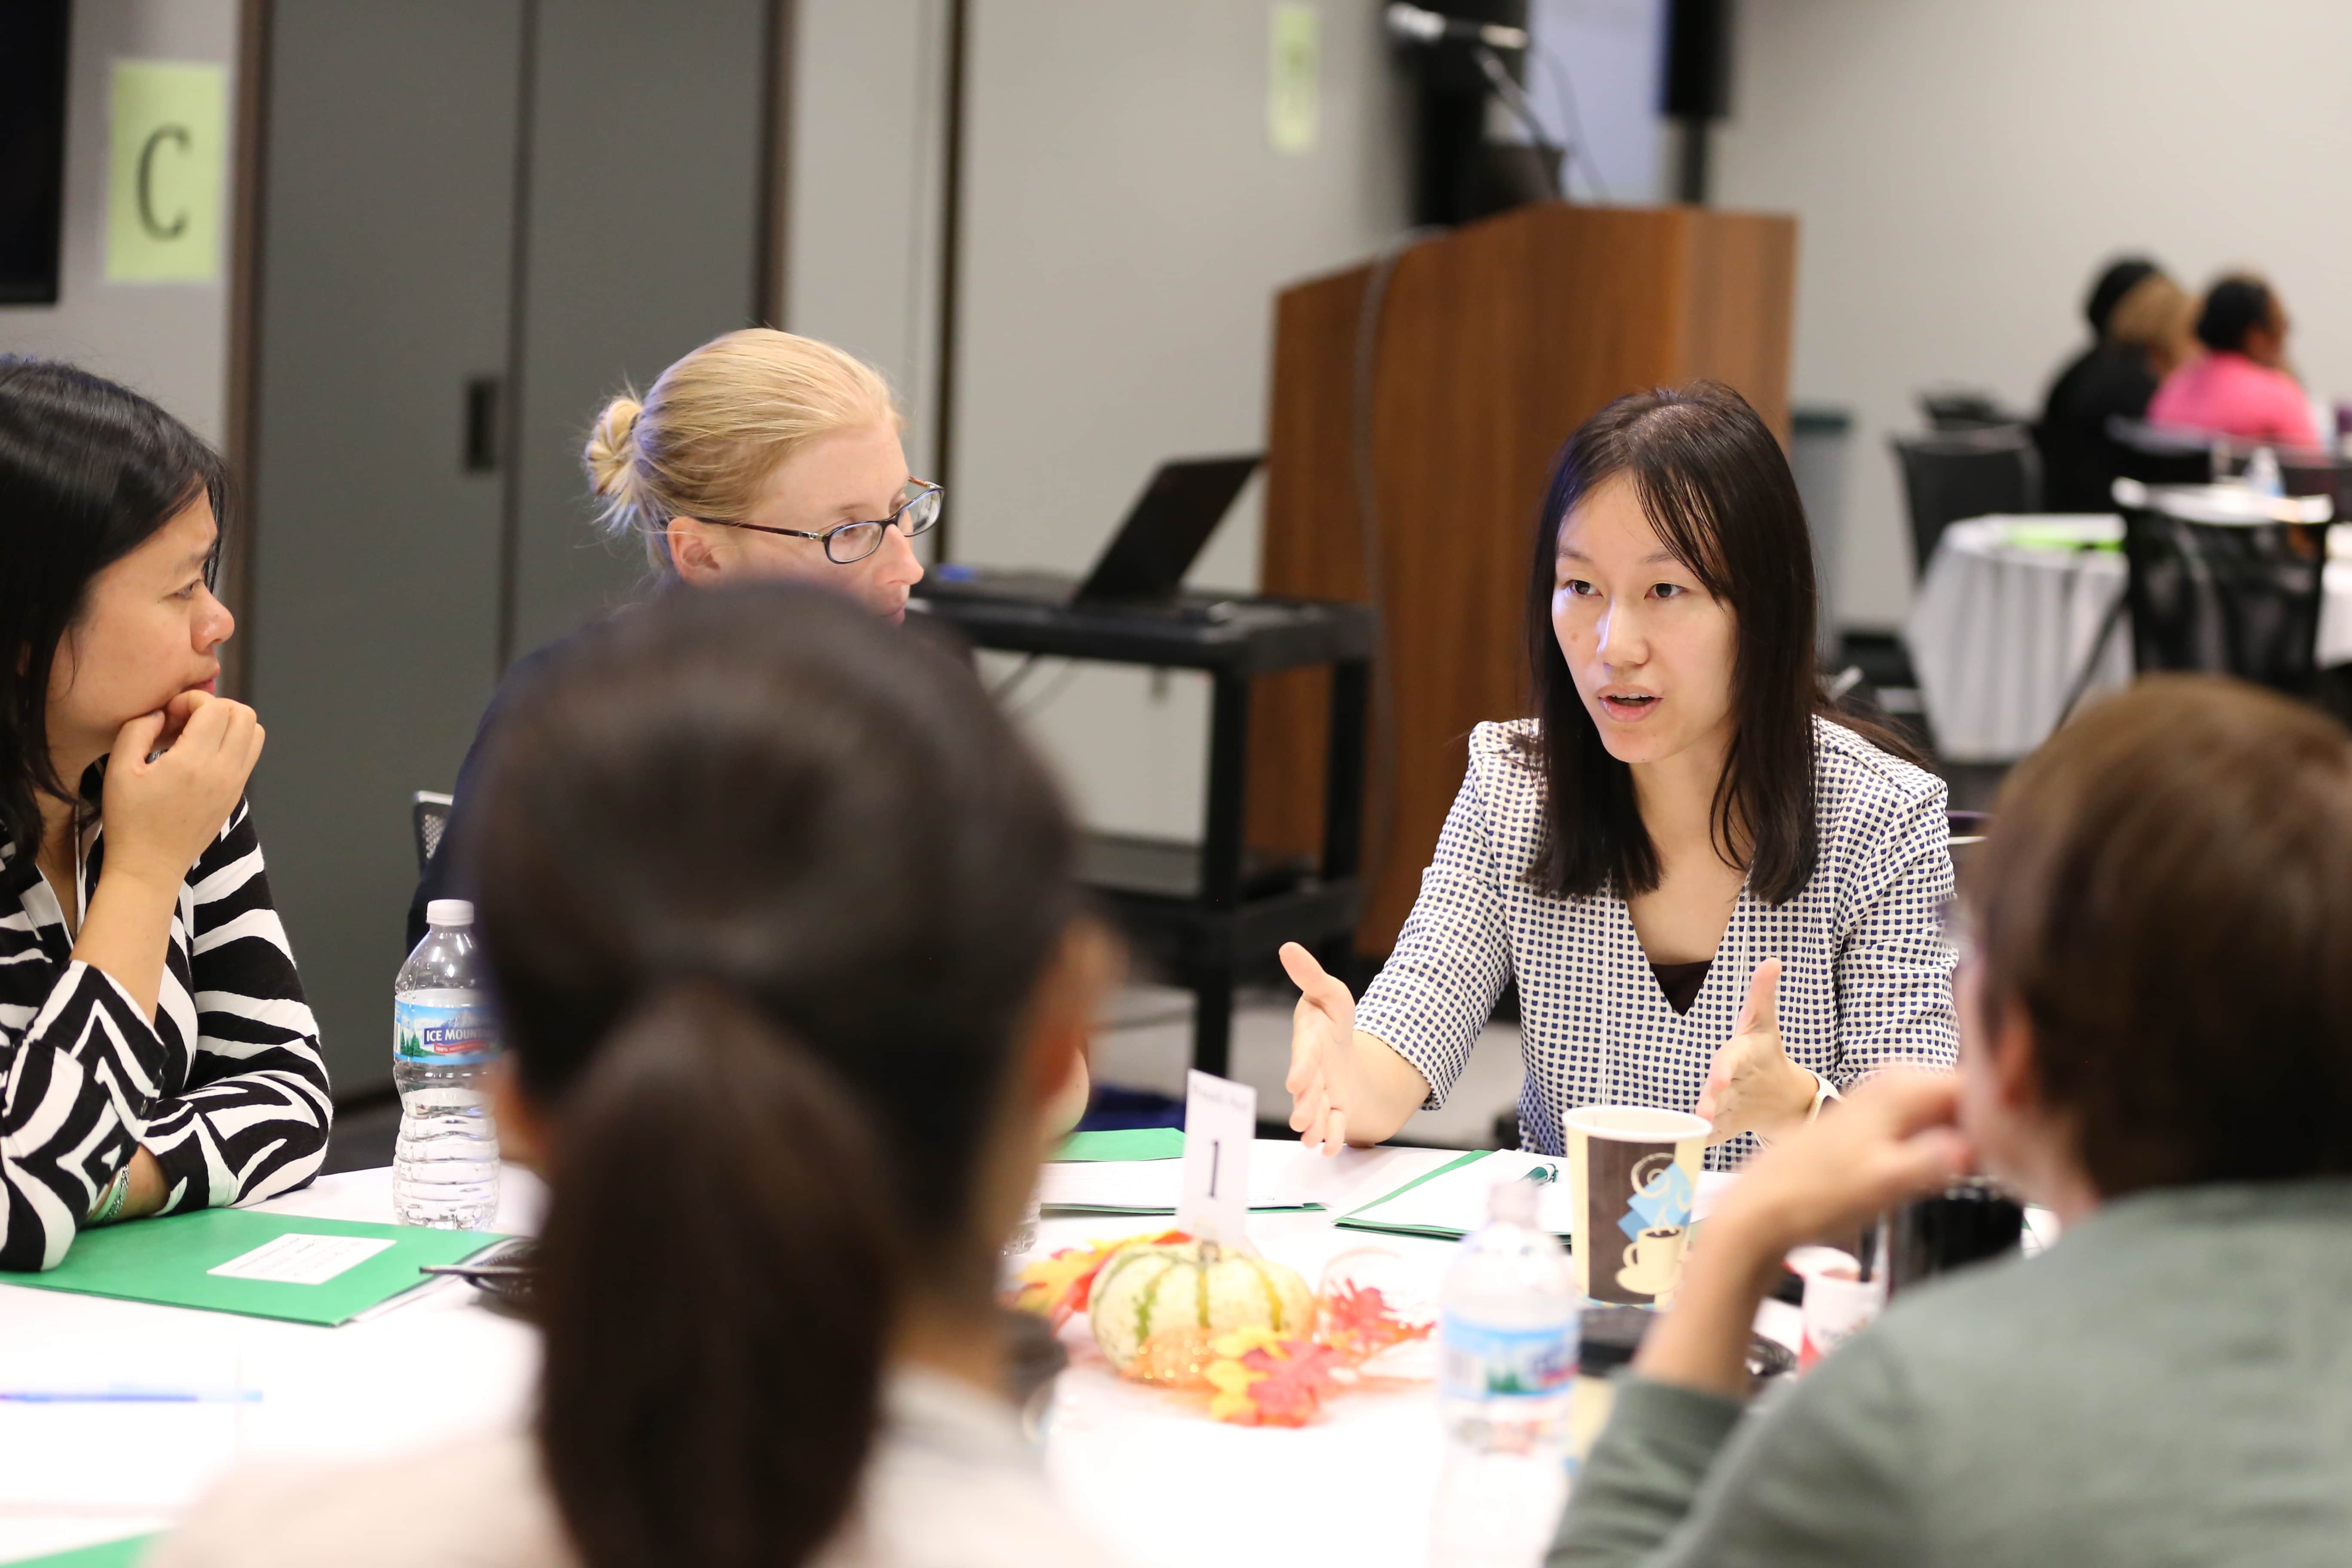 Jingbo Meng, an assistant professor of Communication at Michigan State University, talking with other researchers at the Trifecta kick off meeting.